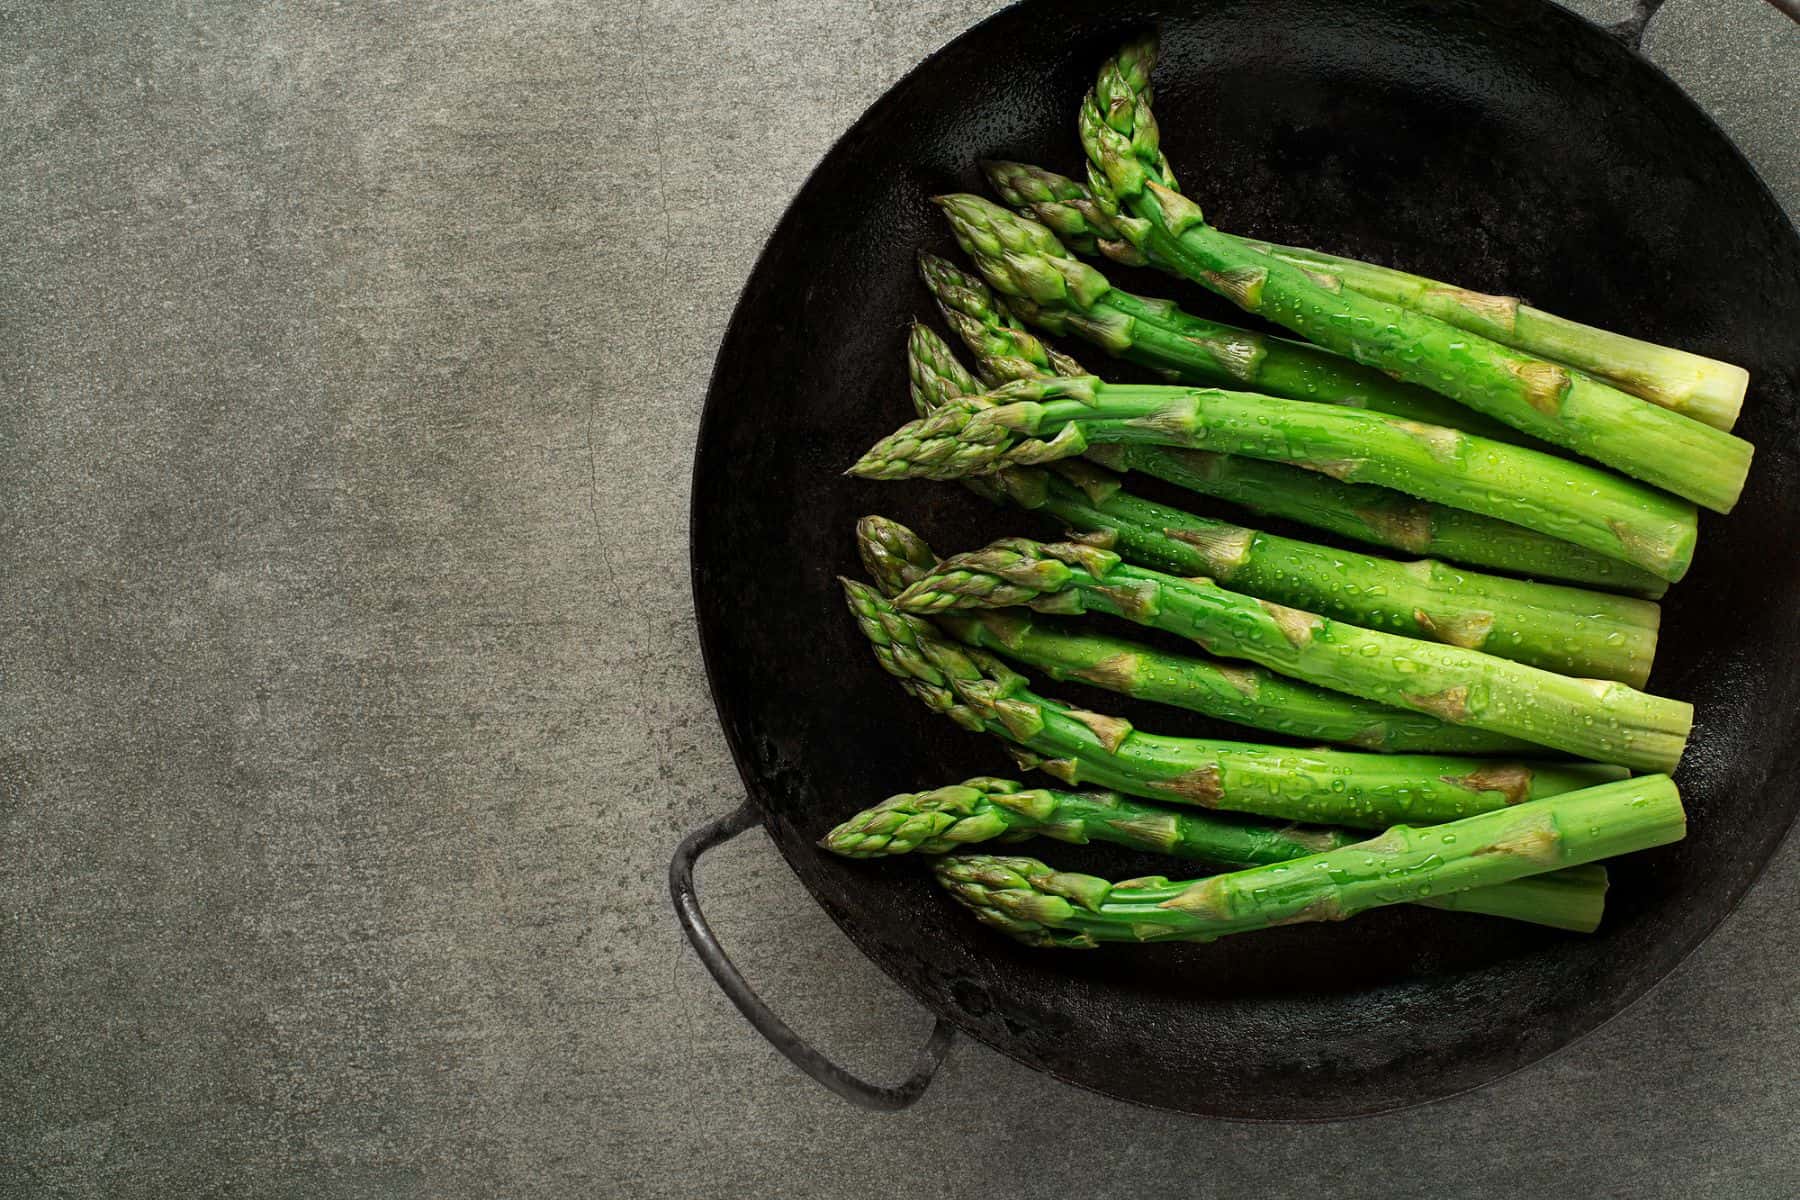 Fresh asparagus spears ready to cook in a cast iron skillet on a textured gray surface, perfect for exploring asparagus recipes.